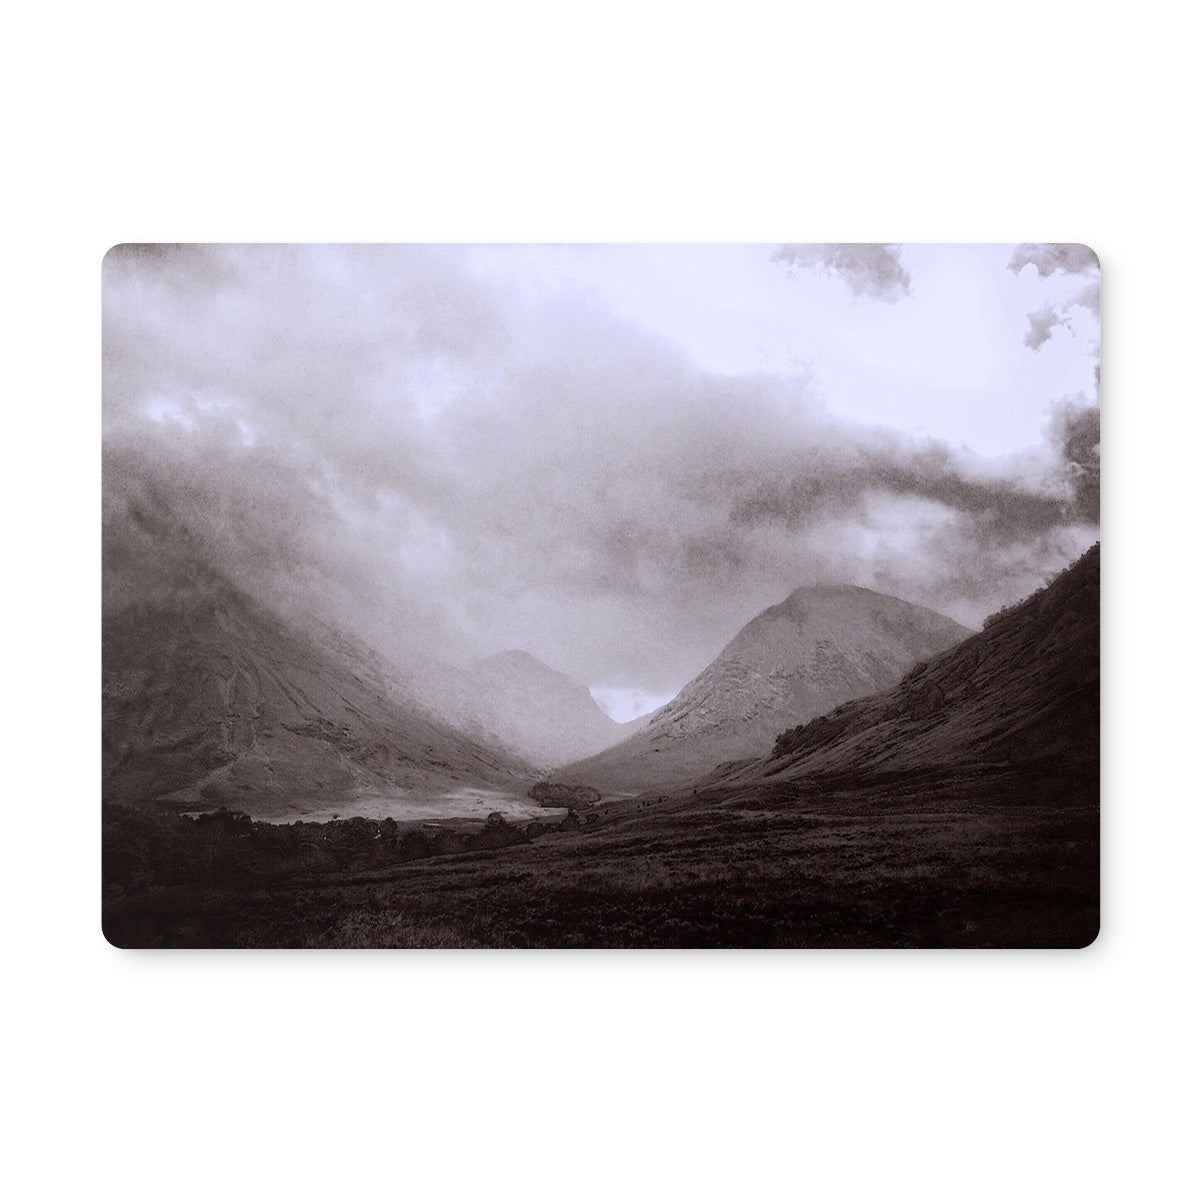 Glencoe Mist Art Gifts Placemat-Placemats-Glencoe Art Gallery-2 Placemats-Paintings, Prints, Homeware, Art Gifts From Scotland By Scottish Artist Kevin Hunter